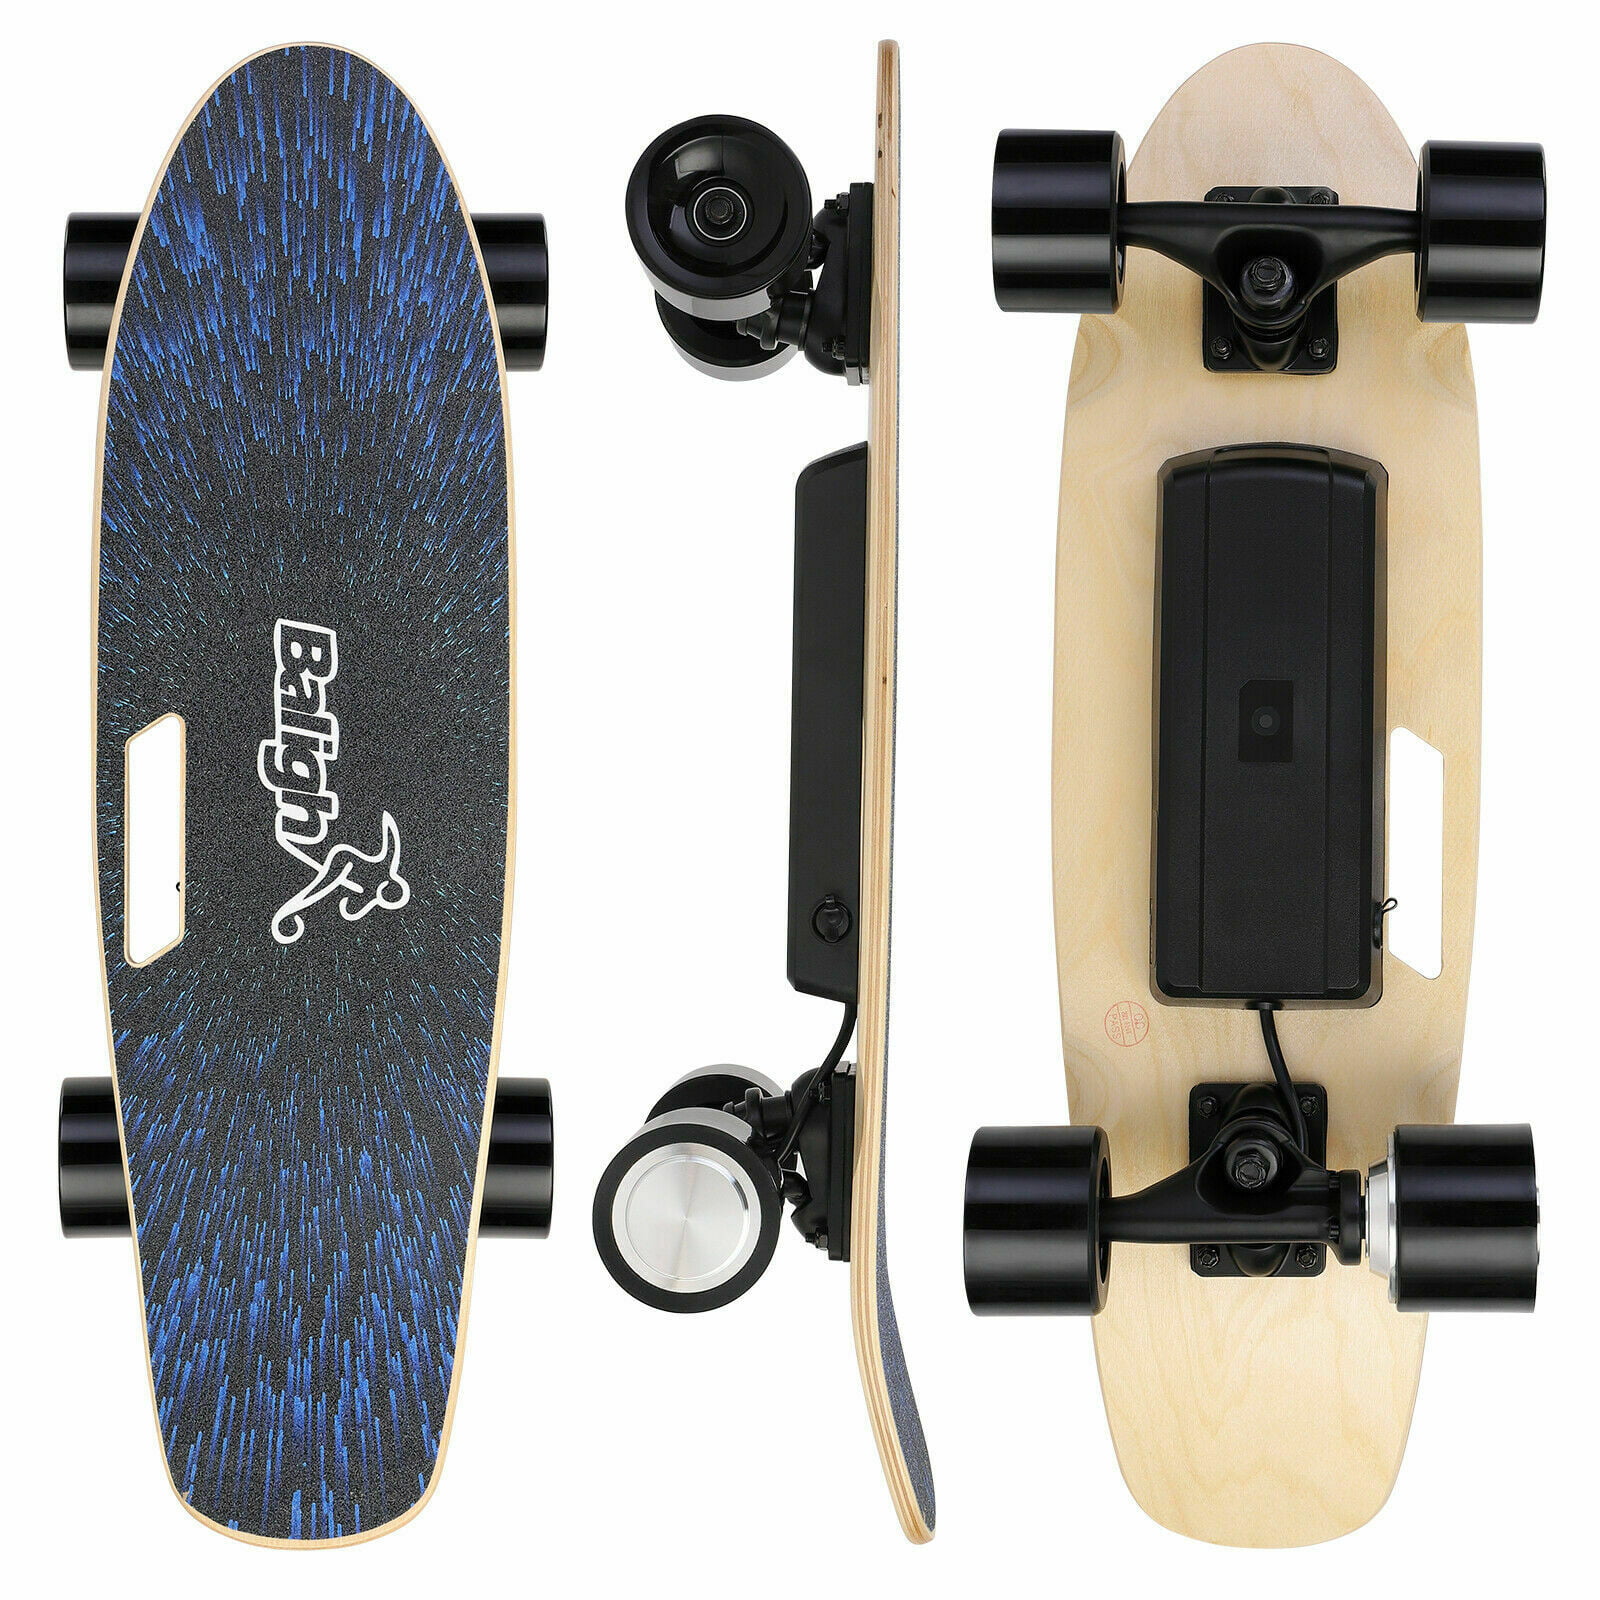 Details about   Maple Deck Electric Skateboard Longboard Crusier with Remote Controller B s c 24 